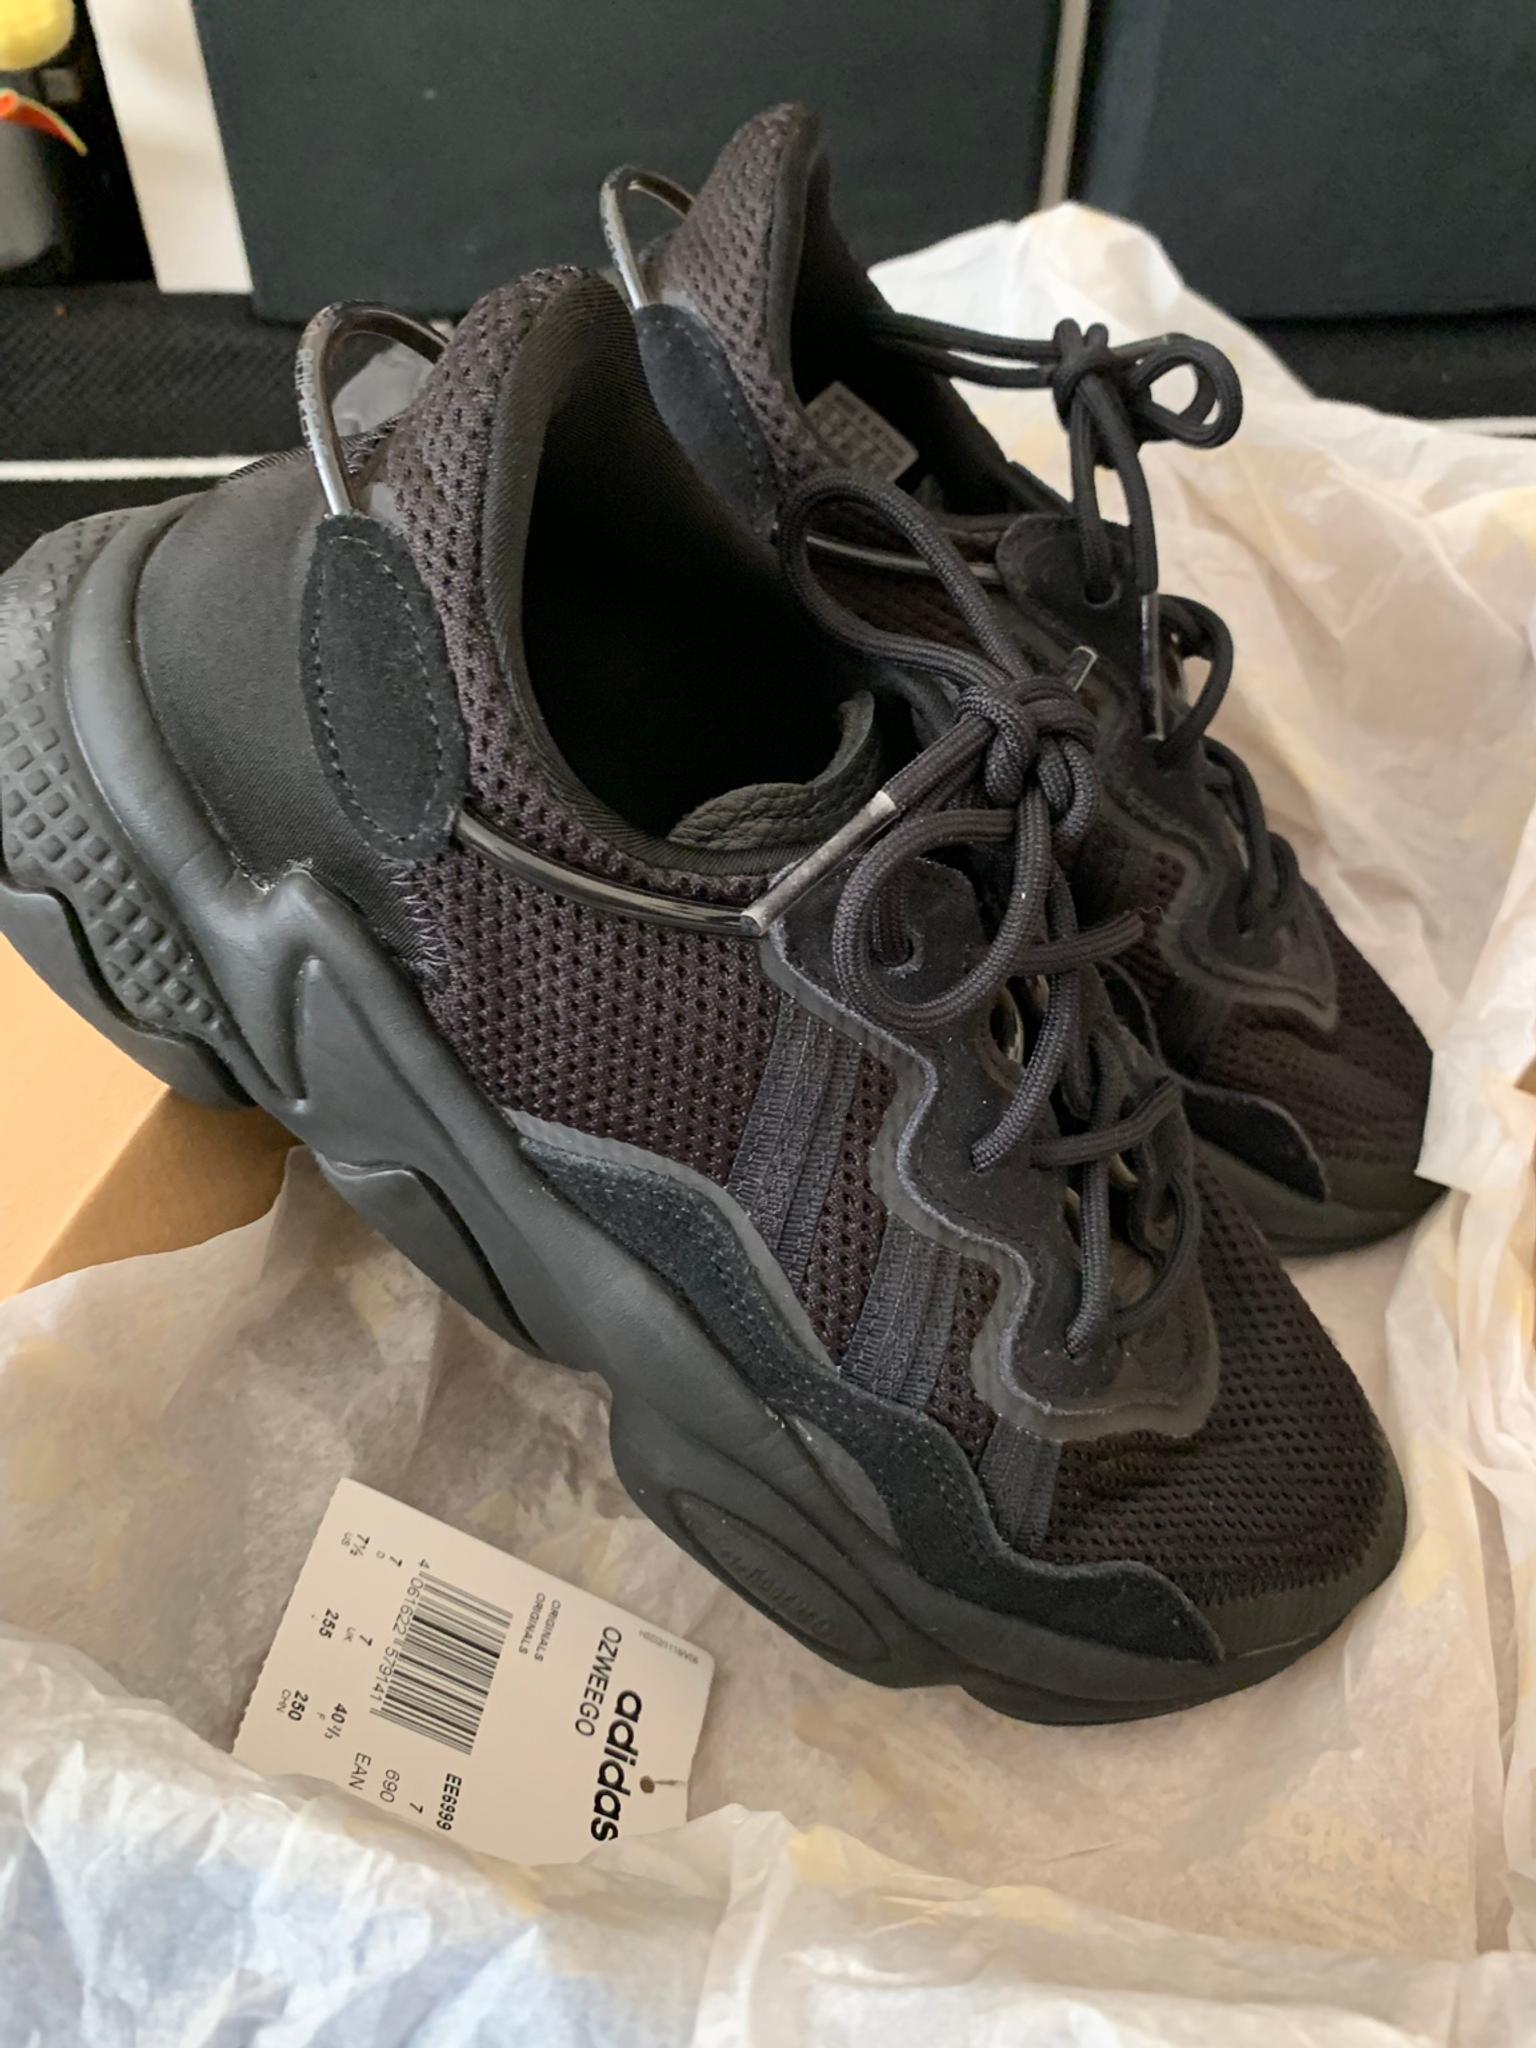 Adidas Ozweego Black Trainers Size 7 in 